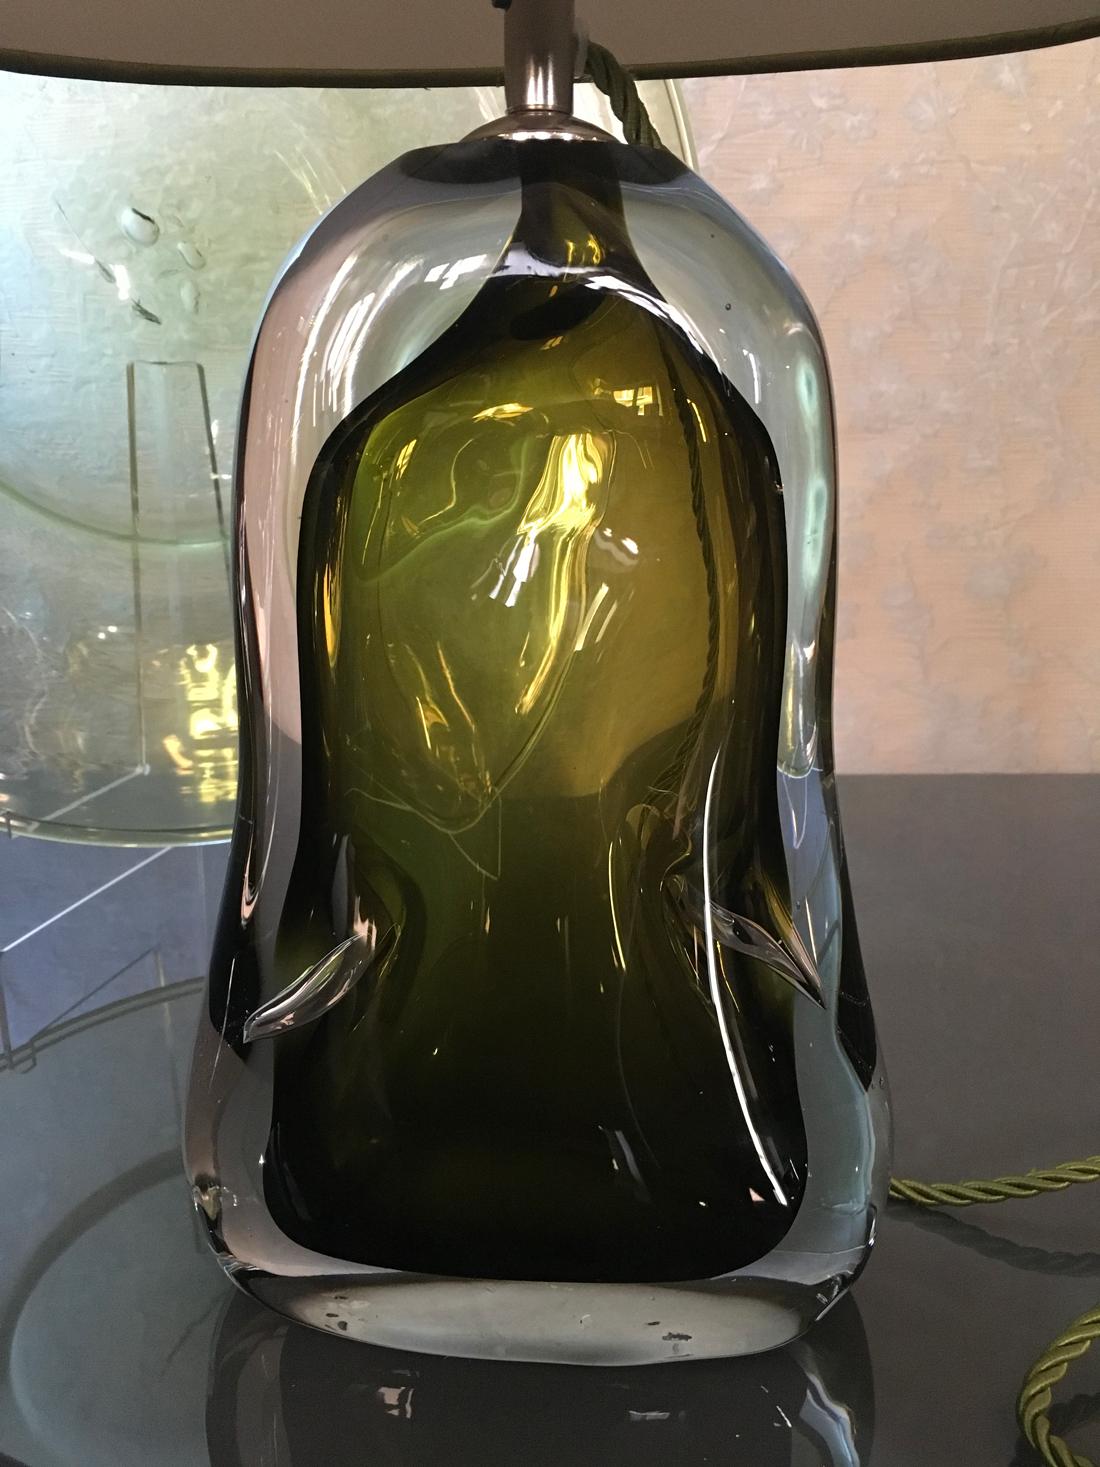 Contemporary green blown glass table lamp.
It is a beautiful eye-catching, an object of art for the solide presence of the handcrafted glass.

Due to the hand made blown glass and the item need to be ordered, the color can be minimun different